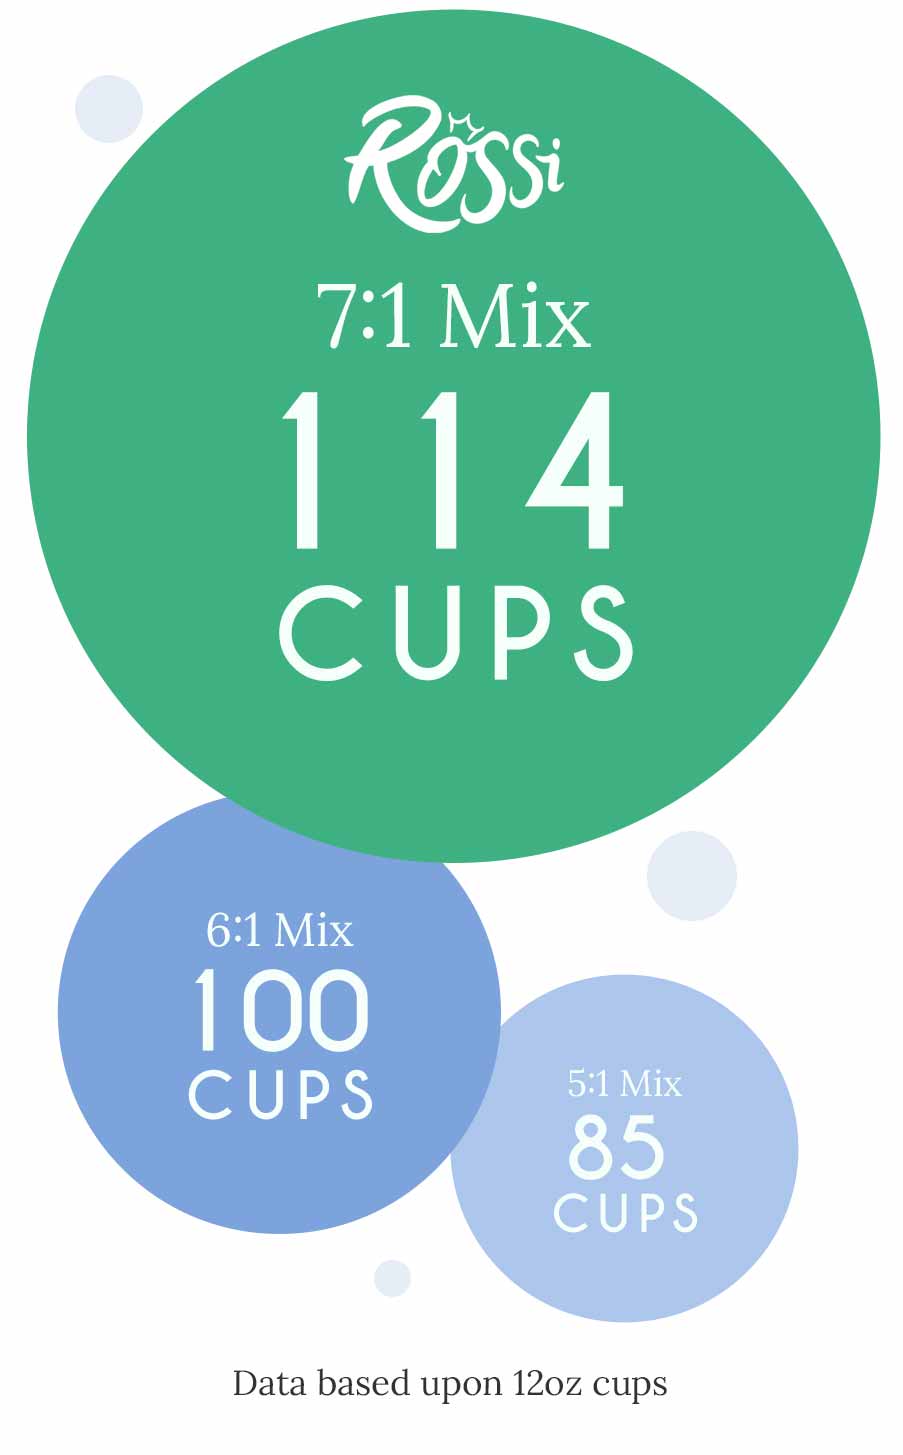 Rossi 7:1 Mix makes 114 12ox Cups